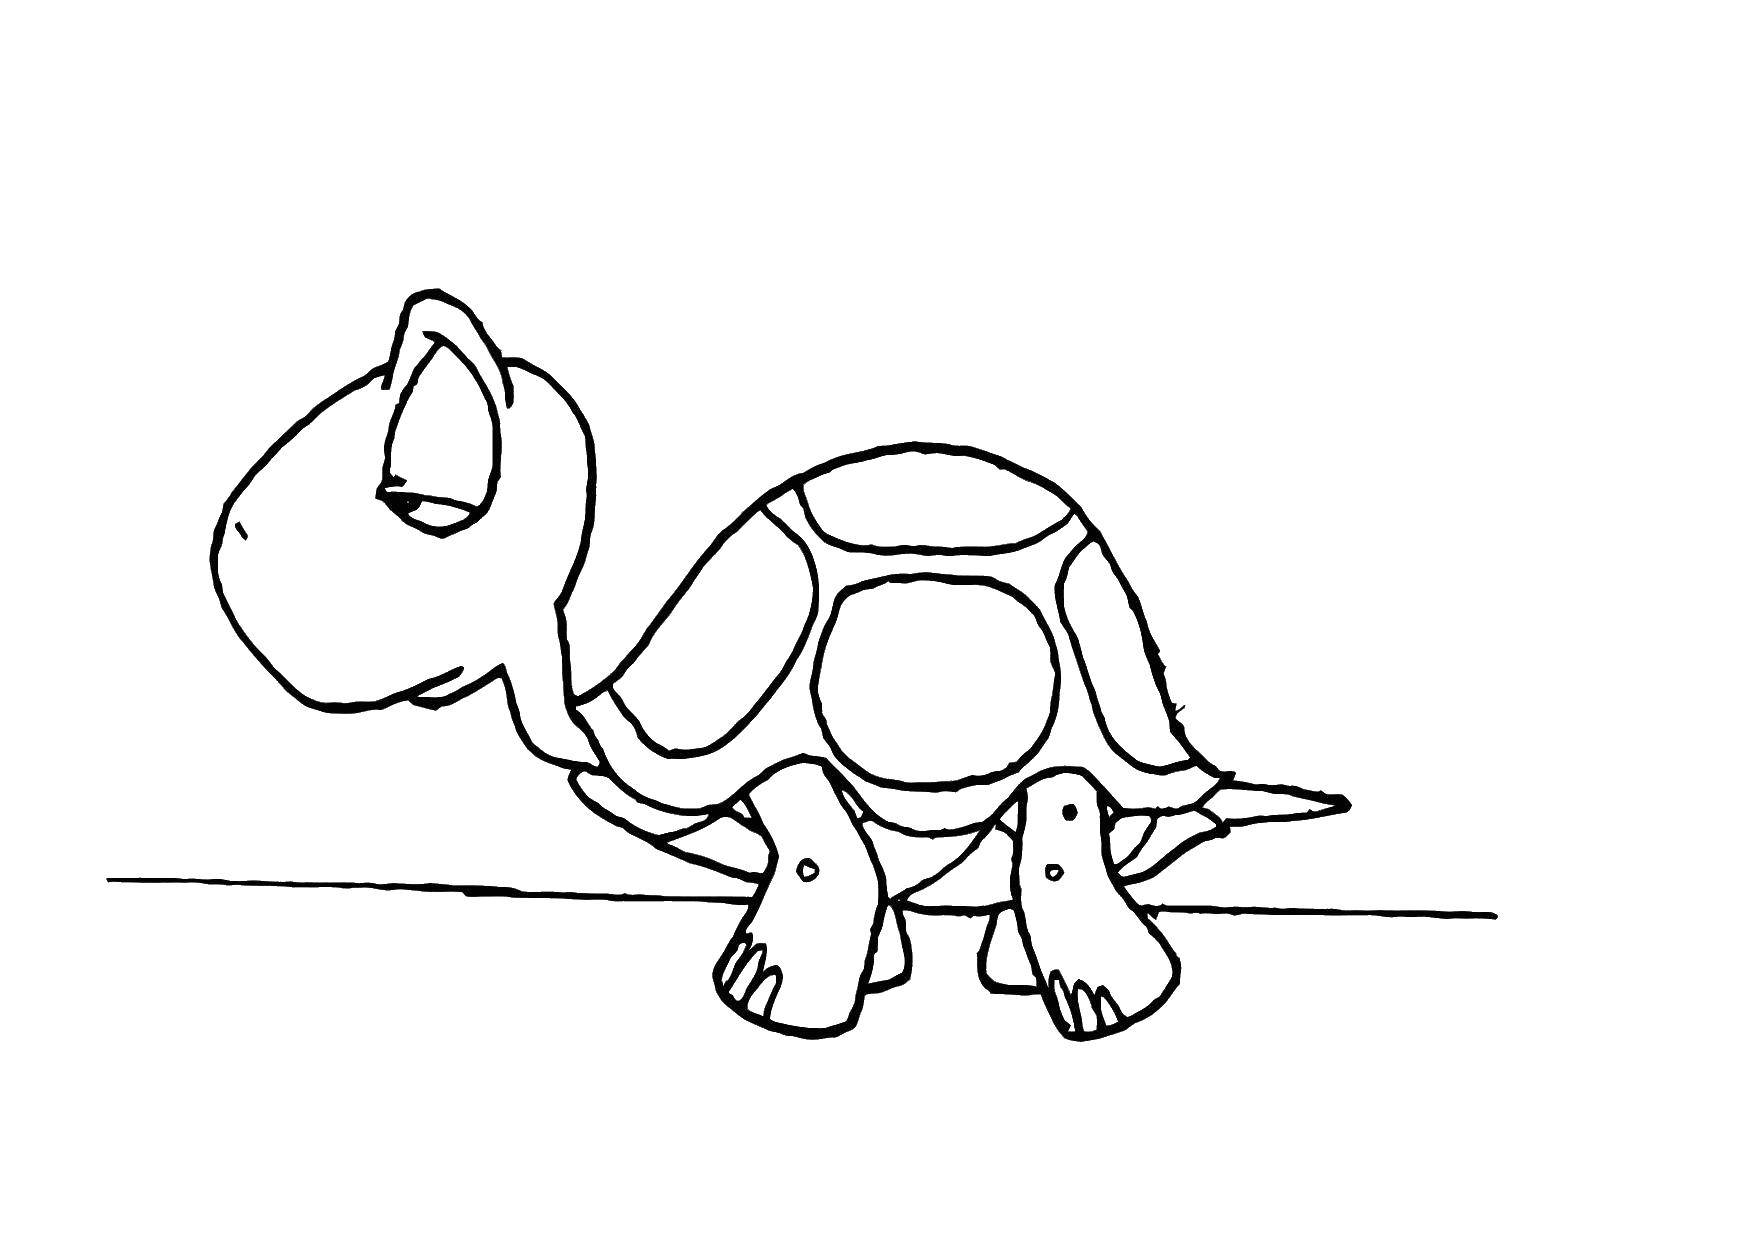 Coloring Bug. Category Animals. Tags:  animals, turtle, shell.